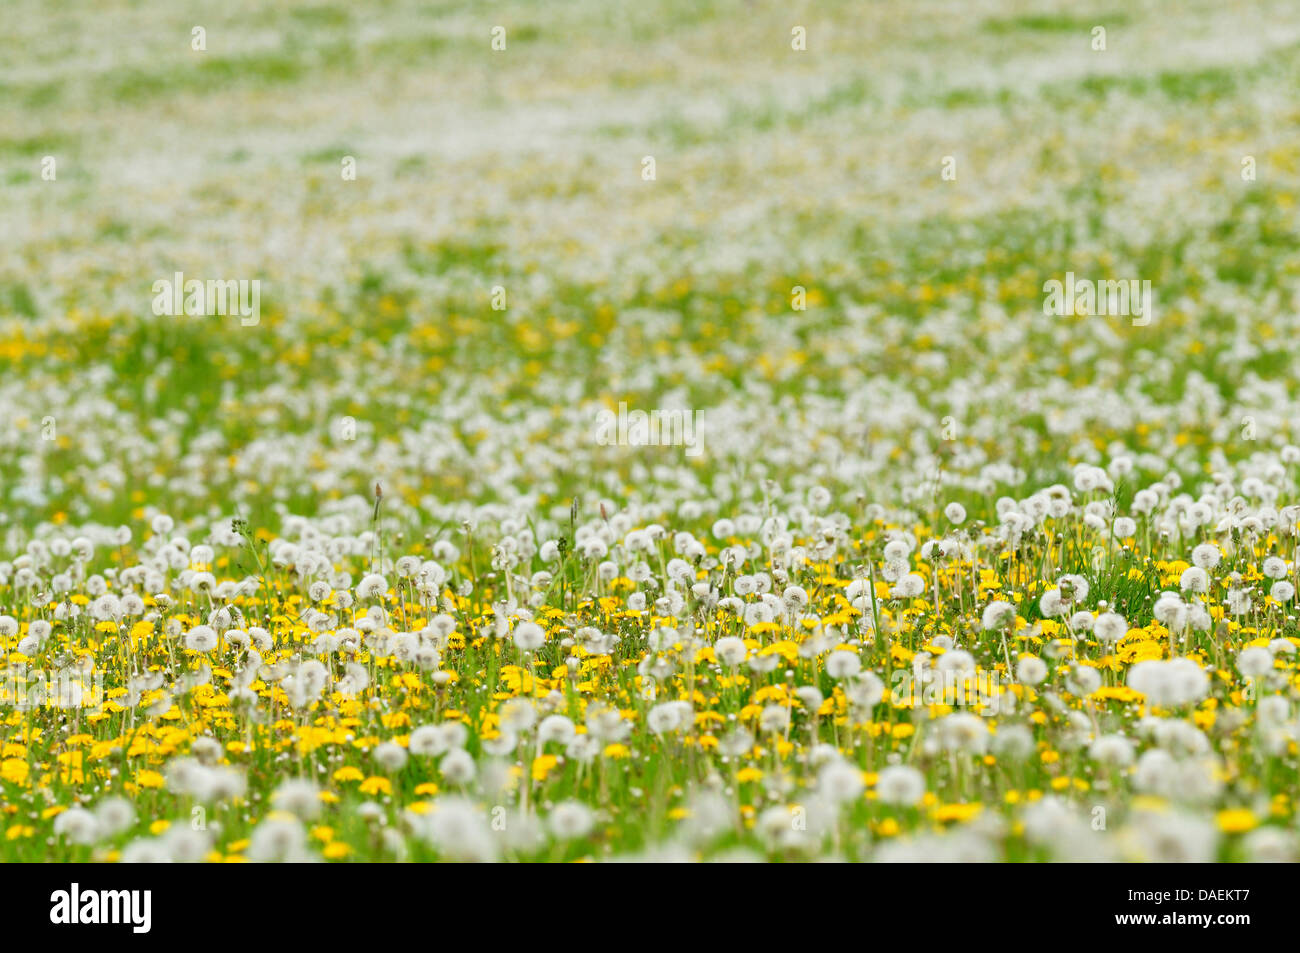 common dandelion (Taraxacum officinale), meadow full of blooming dandelion and seed heads, Germany Stock Photo